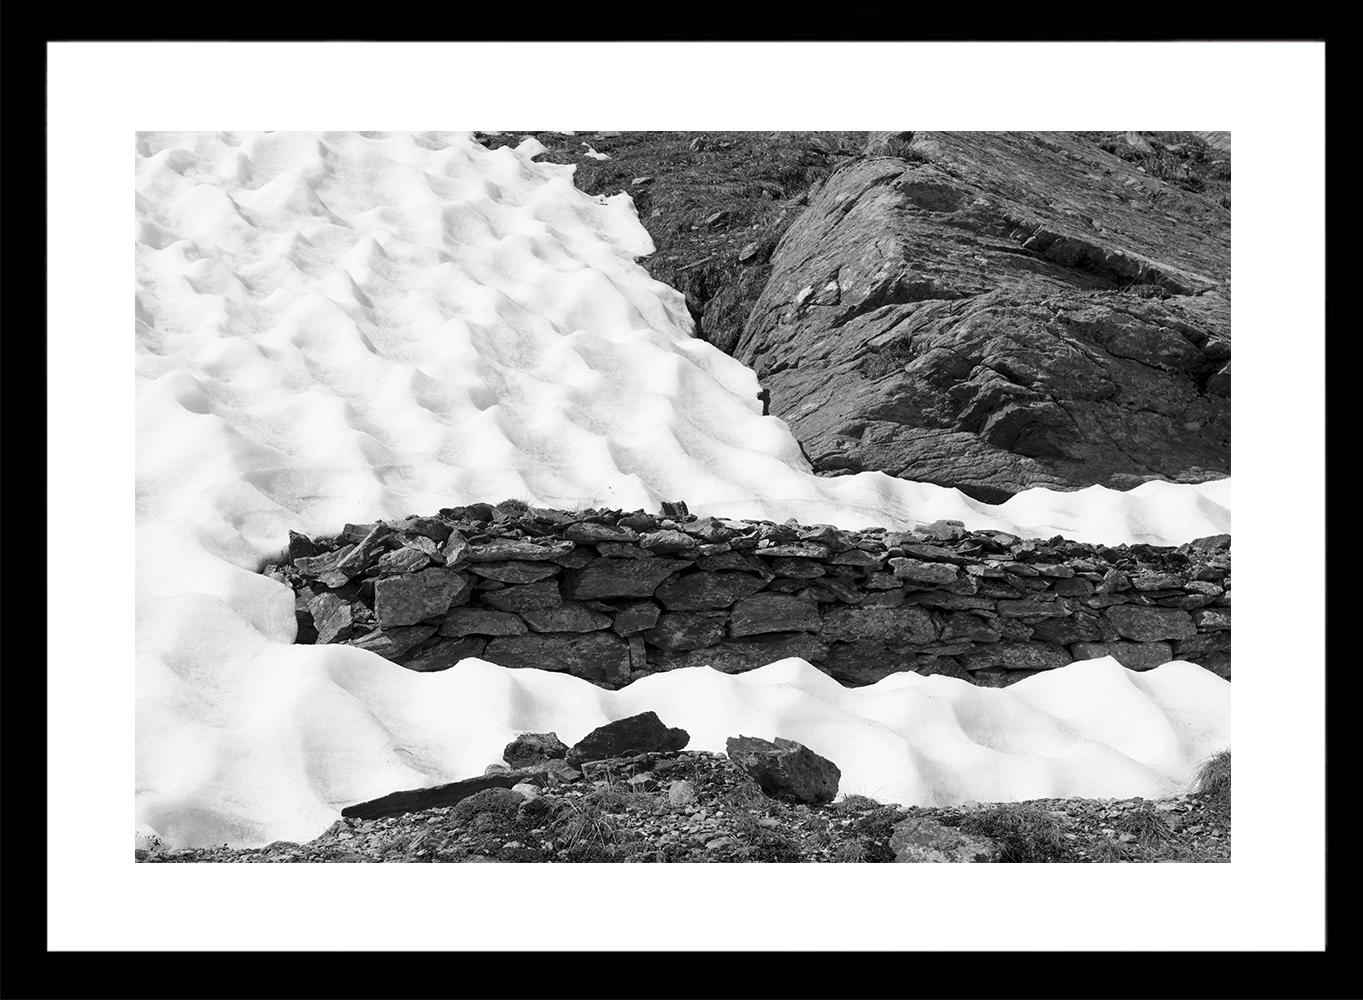 Luca Artioli Landscape Photograph - A Fatal Pass, War remains emerging from the snow. Black and White landscape